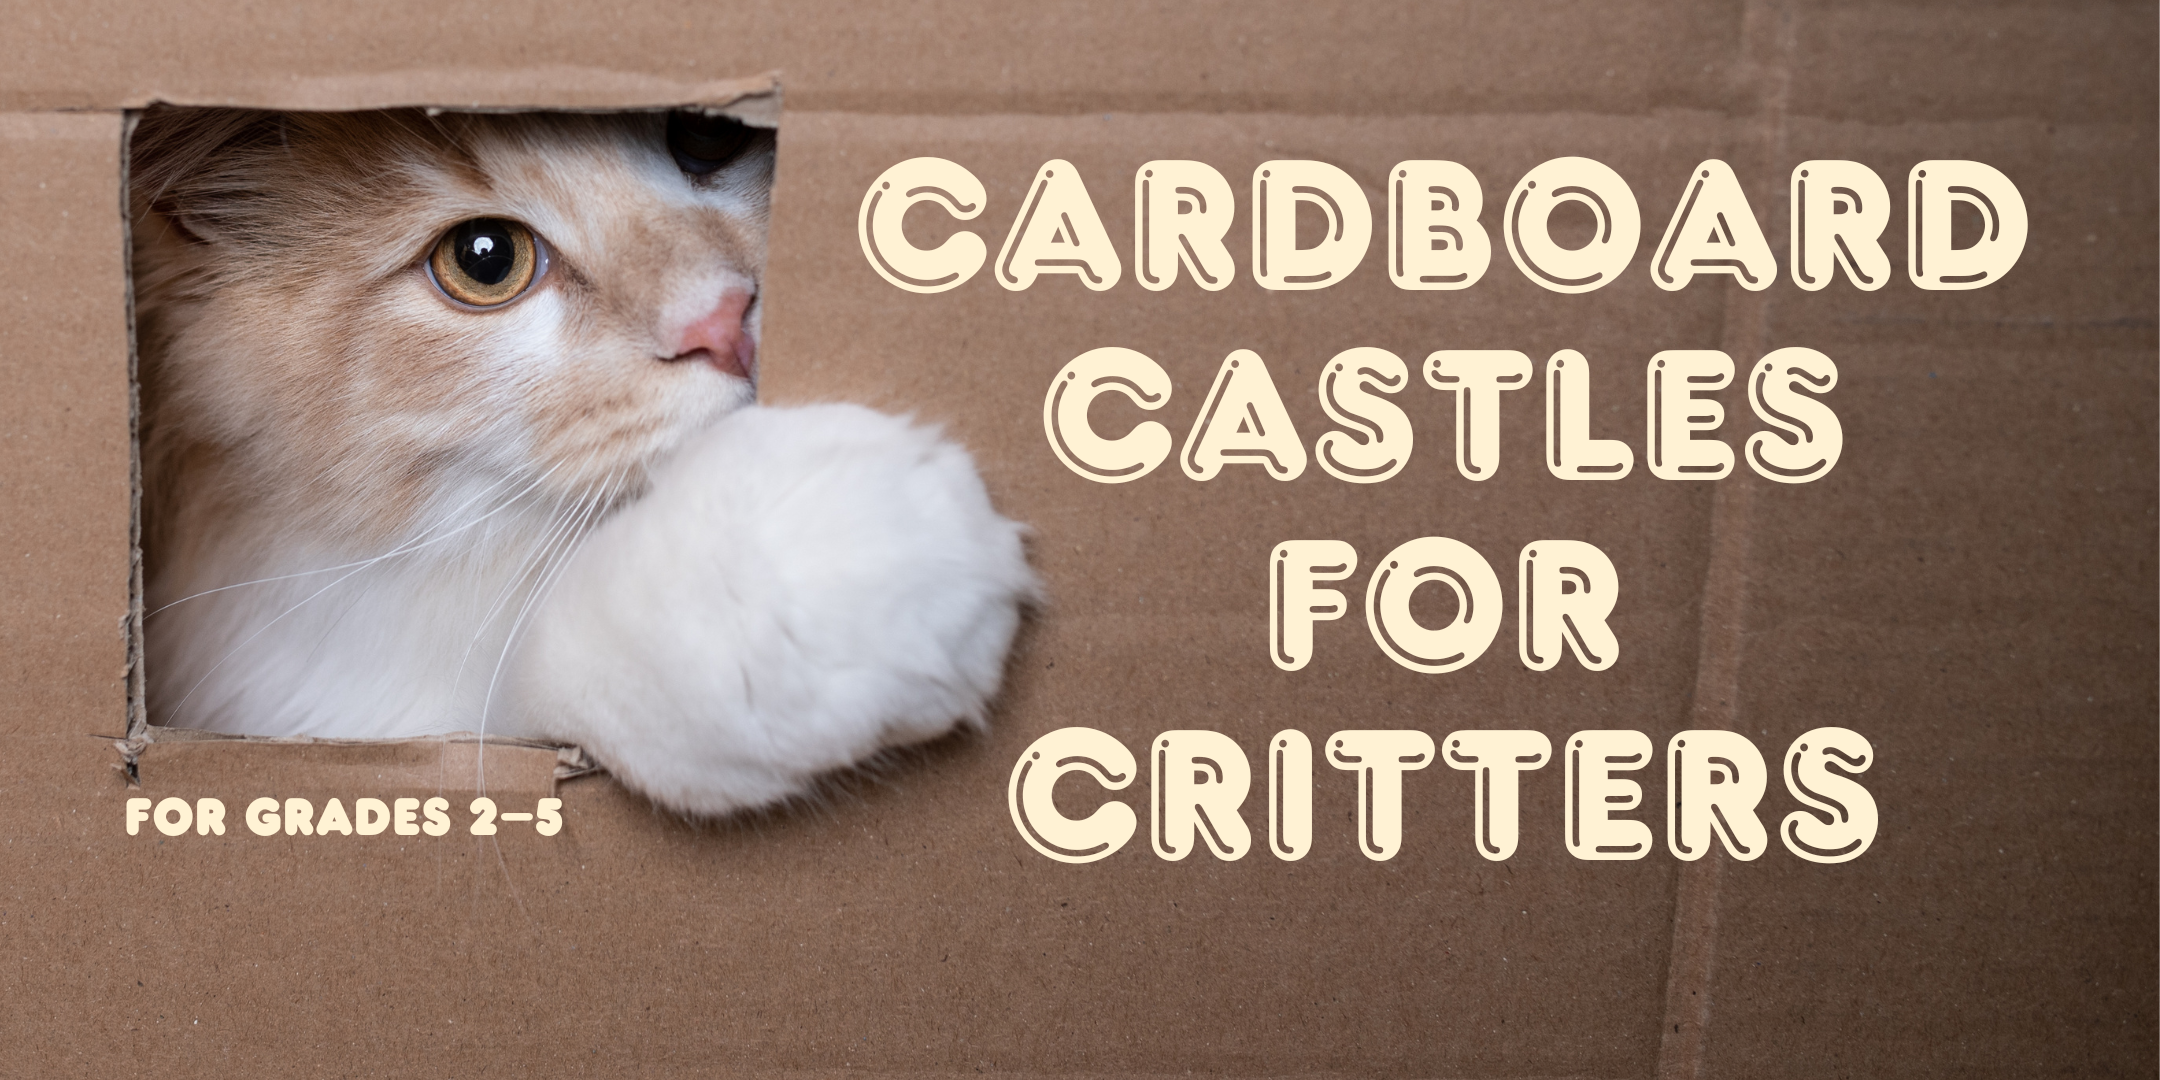 Cardboard Castles for Critters for Grades 2–5 in cream colored text over a photo of a cats head poling out of a hole in a cardboard box